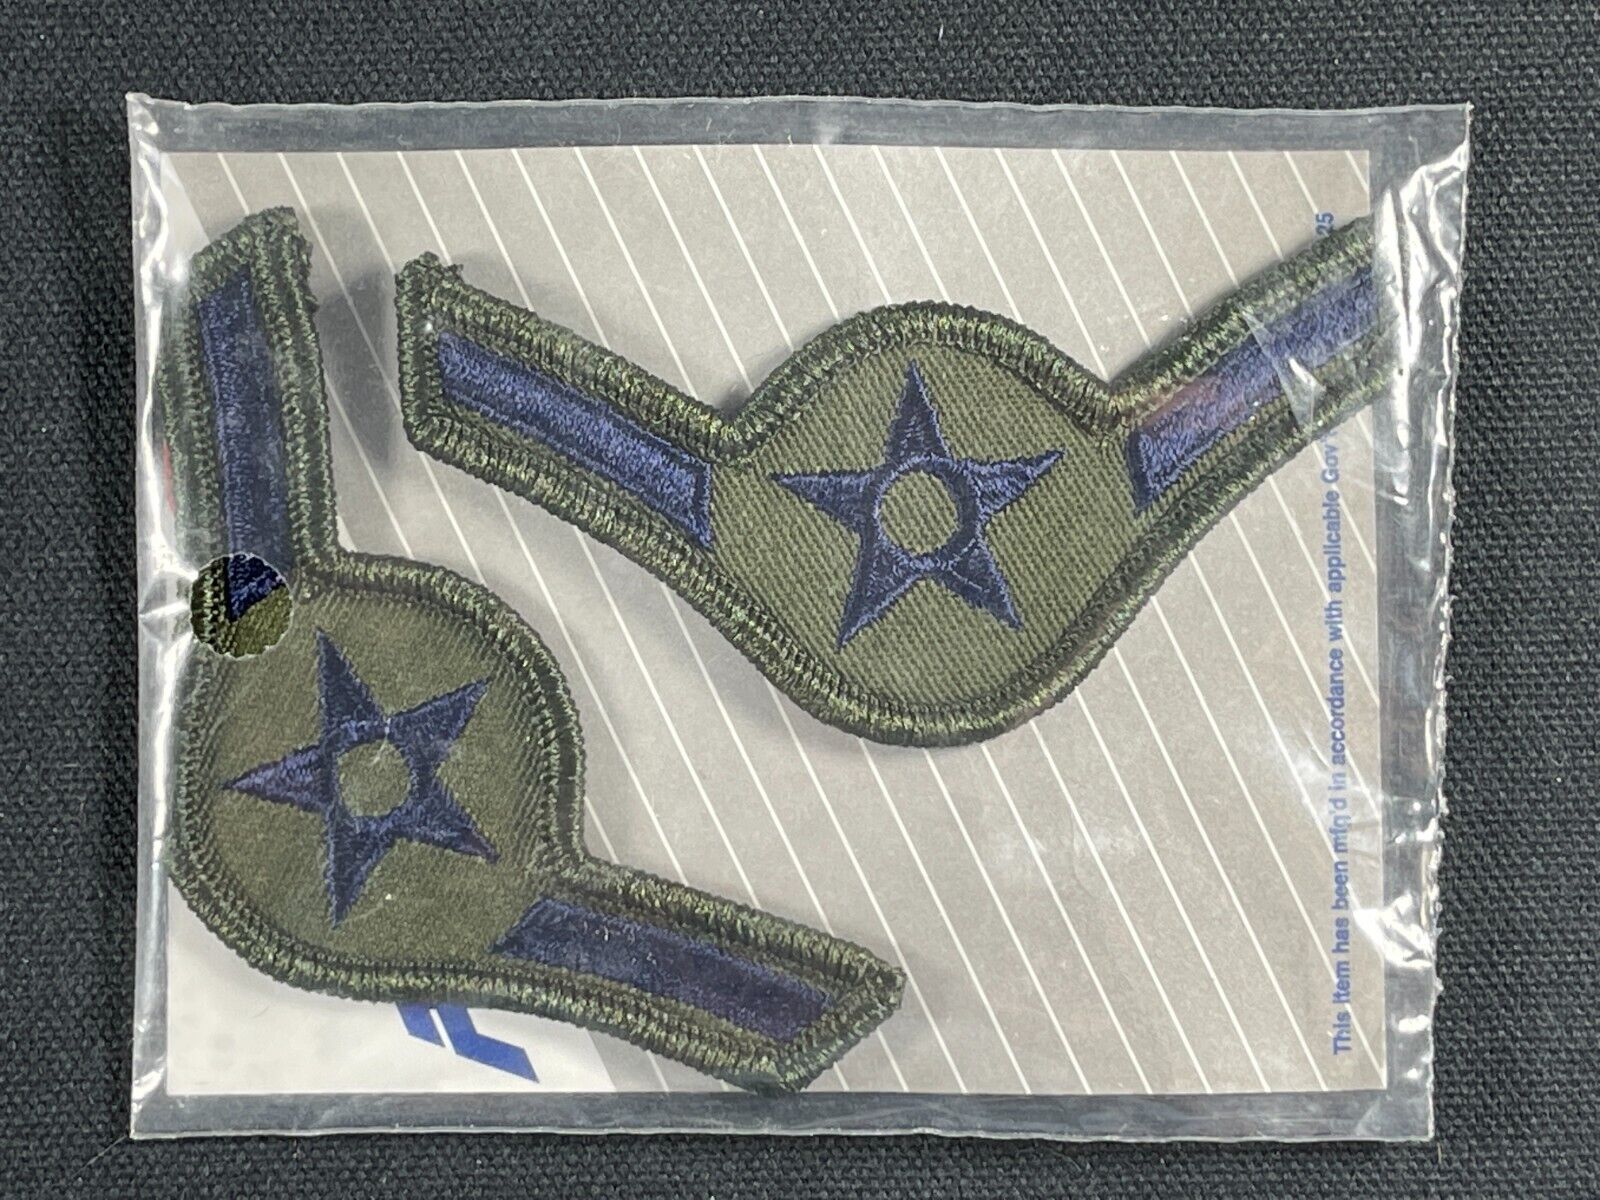 MINT Air Force Airman Sub Small rank patches